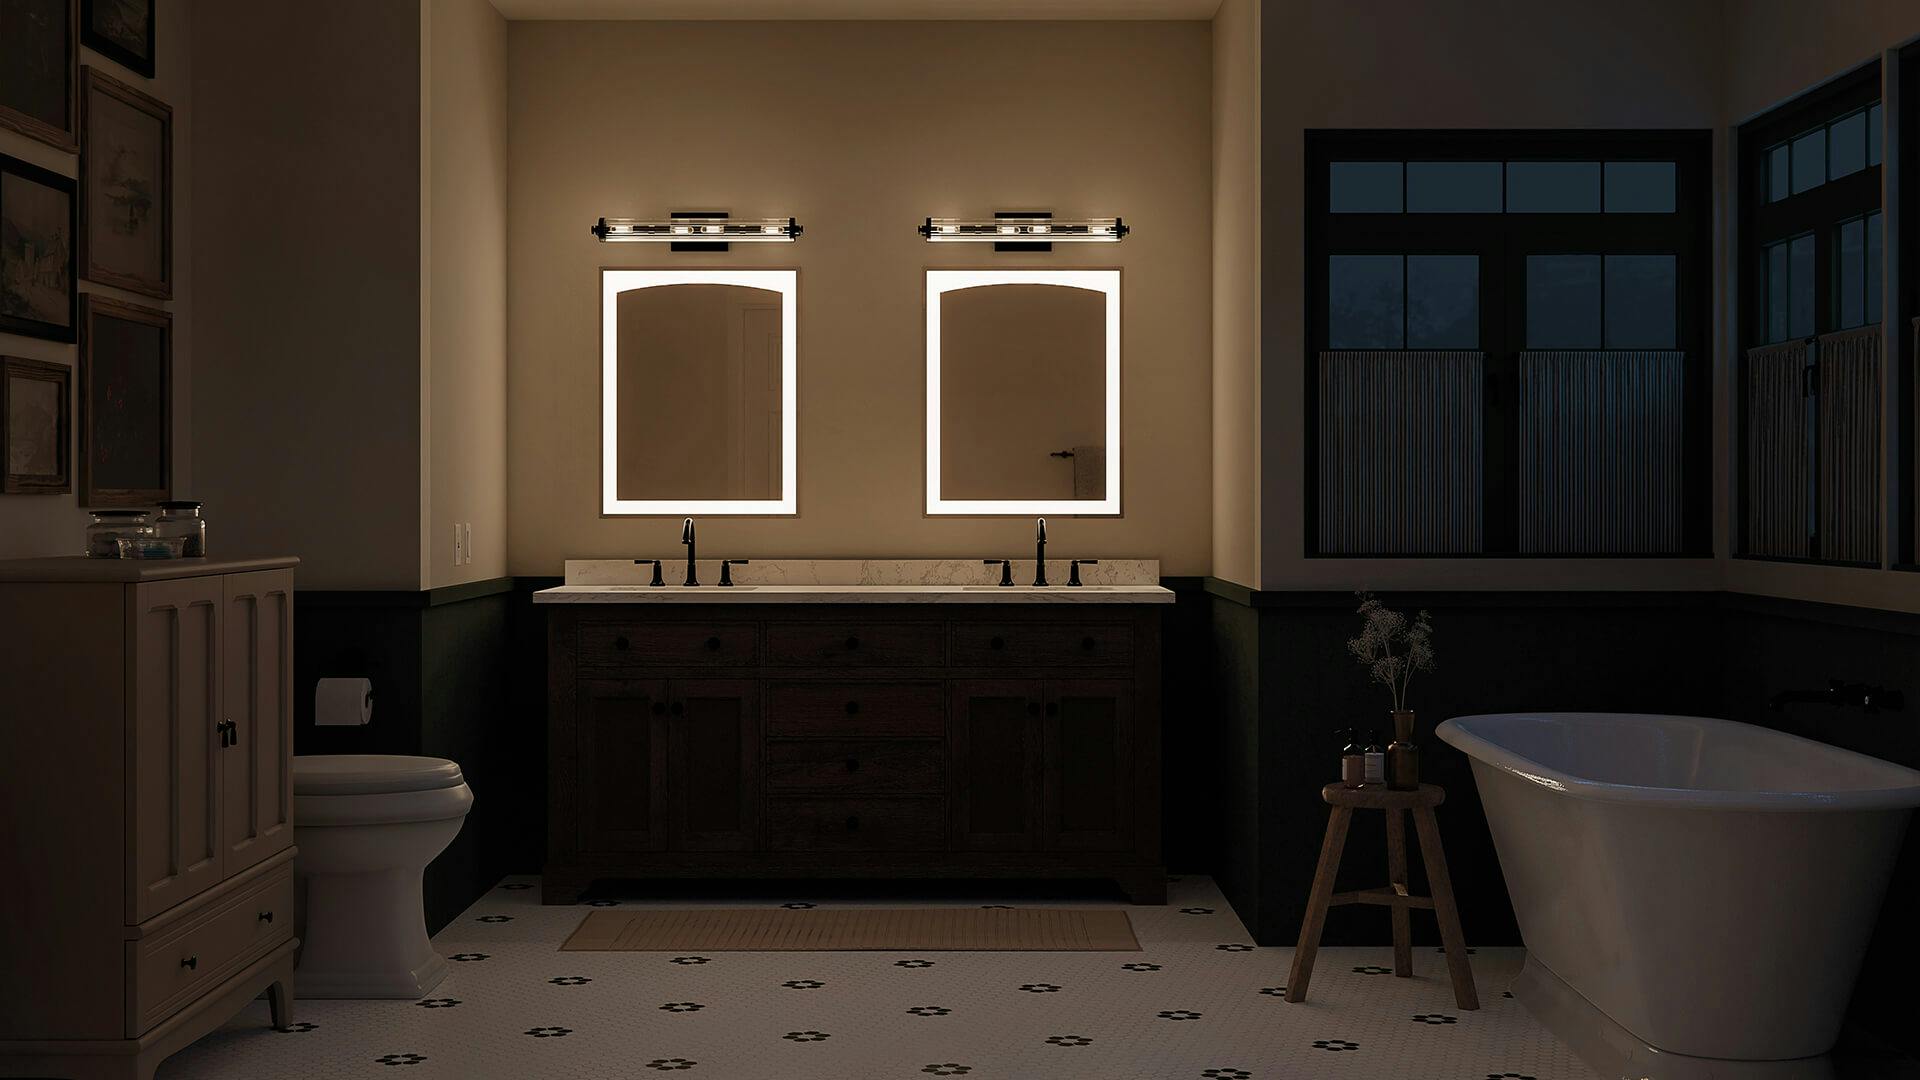 Bathroom at night with double vanity and 2 Azores linear vanity lights in black above the sink